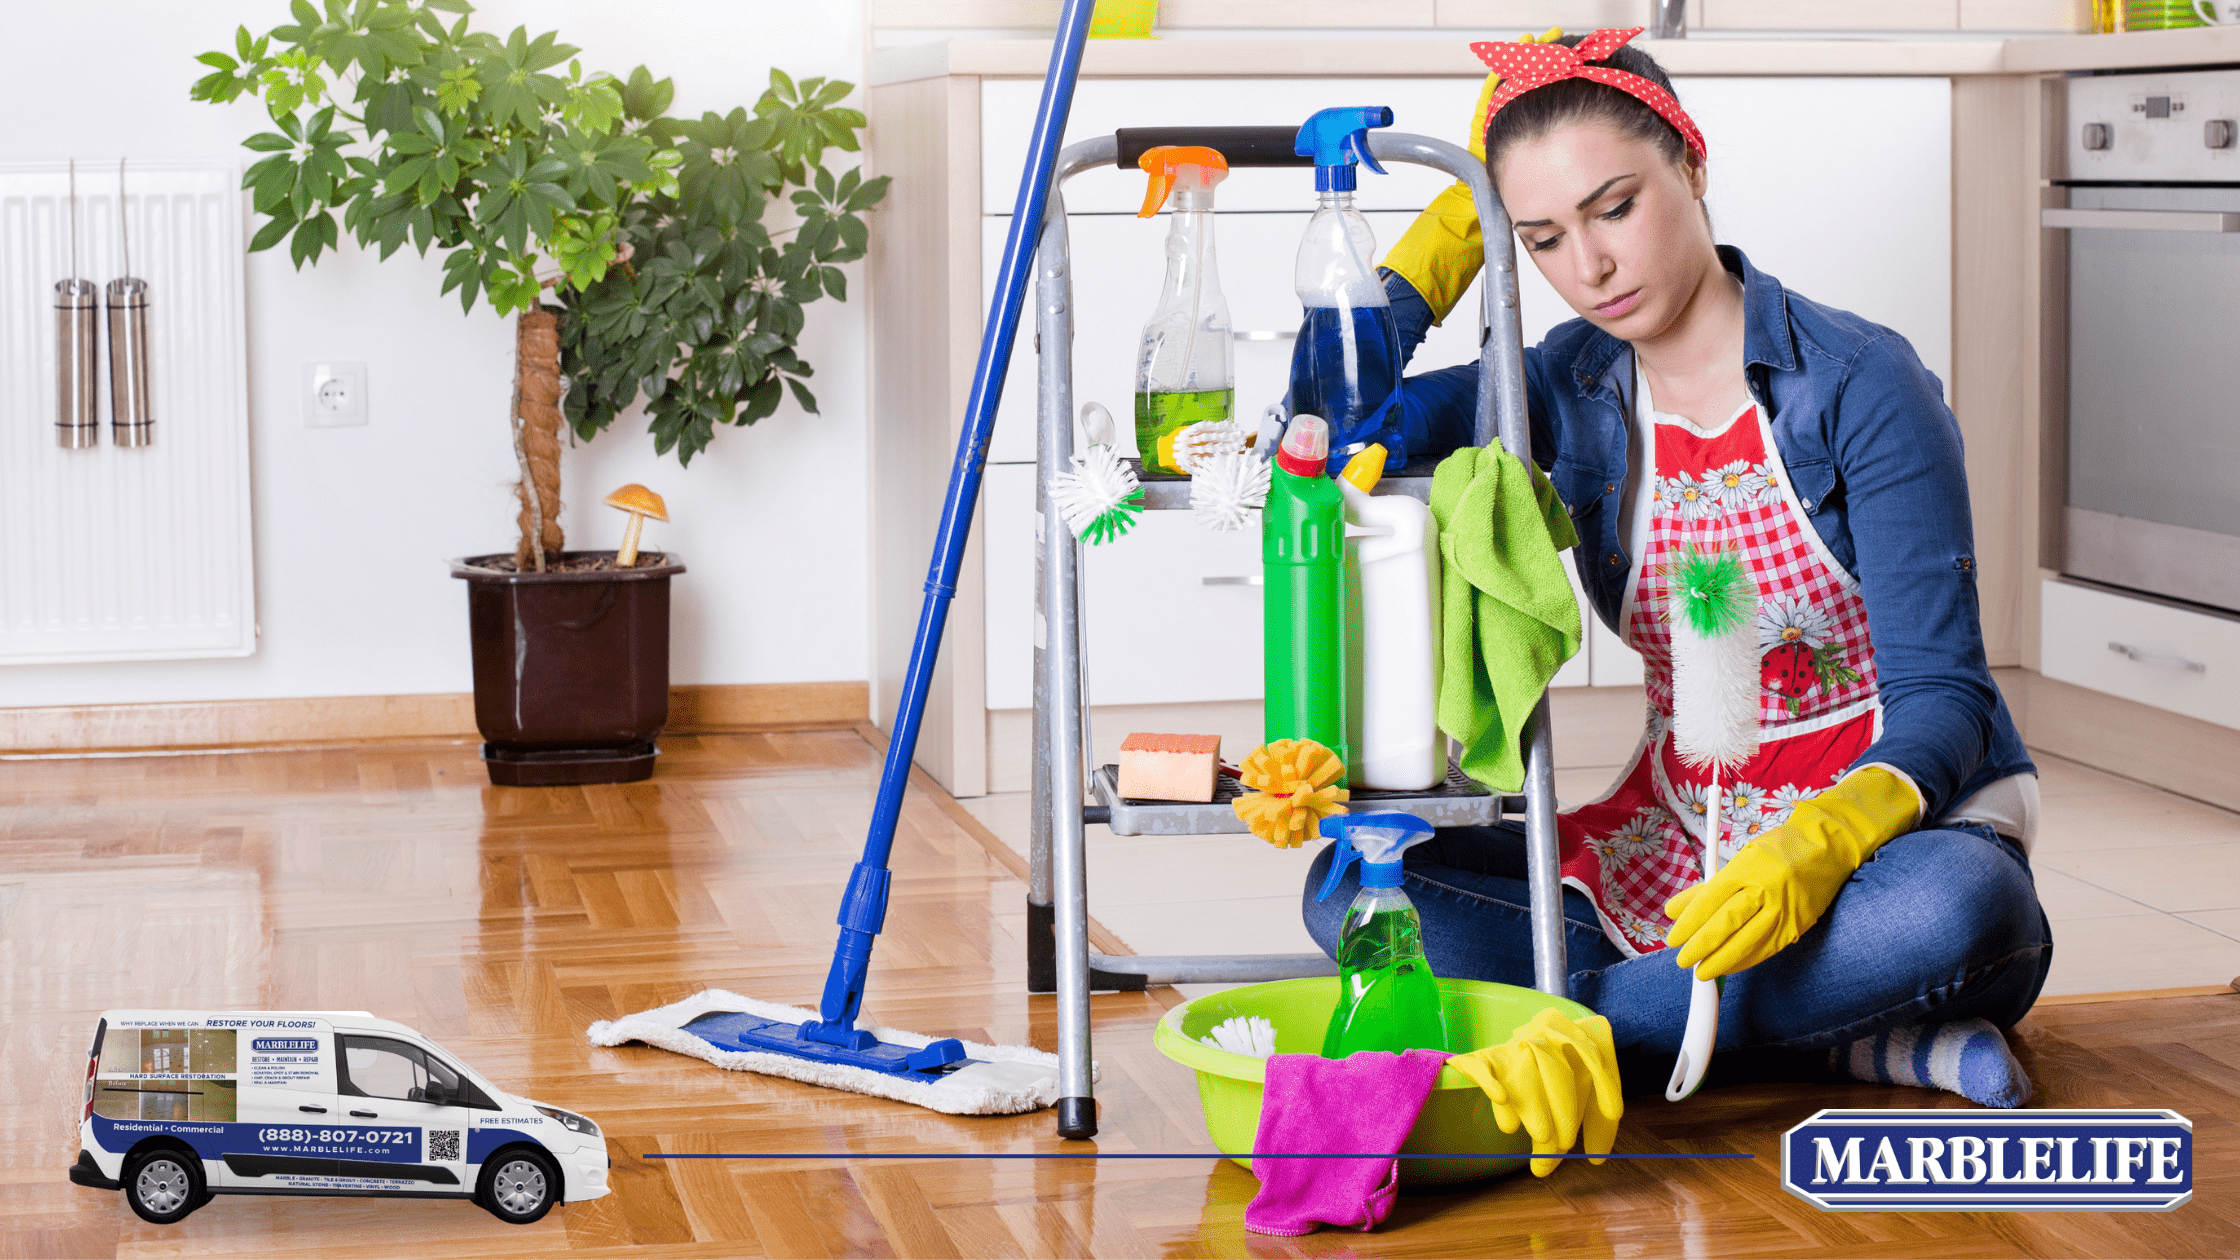 Tired of Cleaning Frustration? Choose the Cleaner that Actually Works! - Post